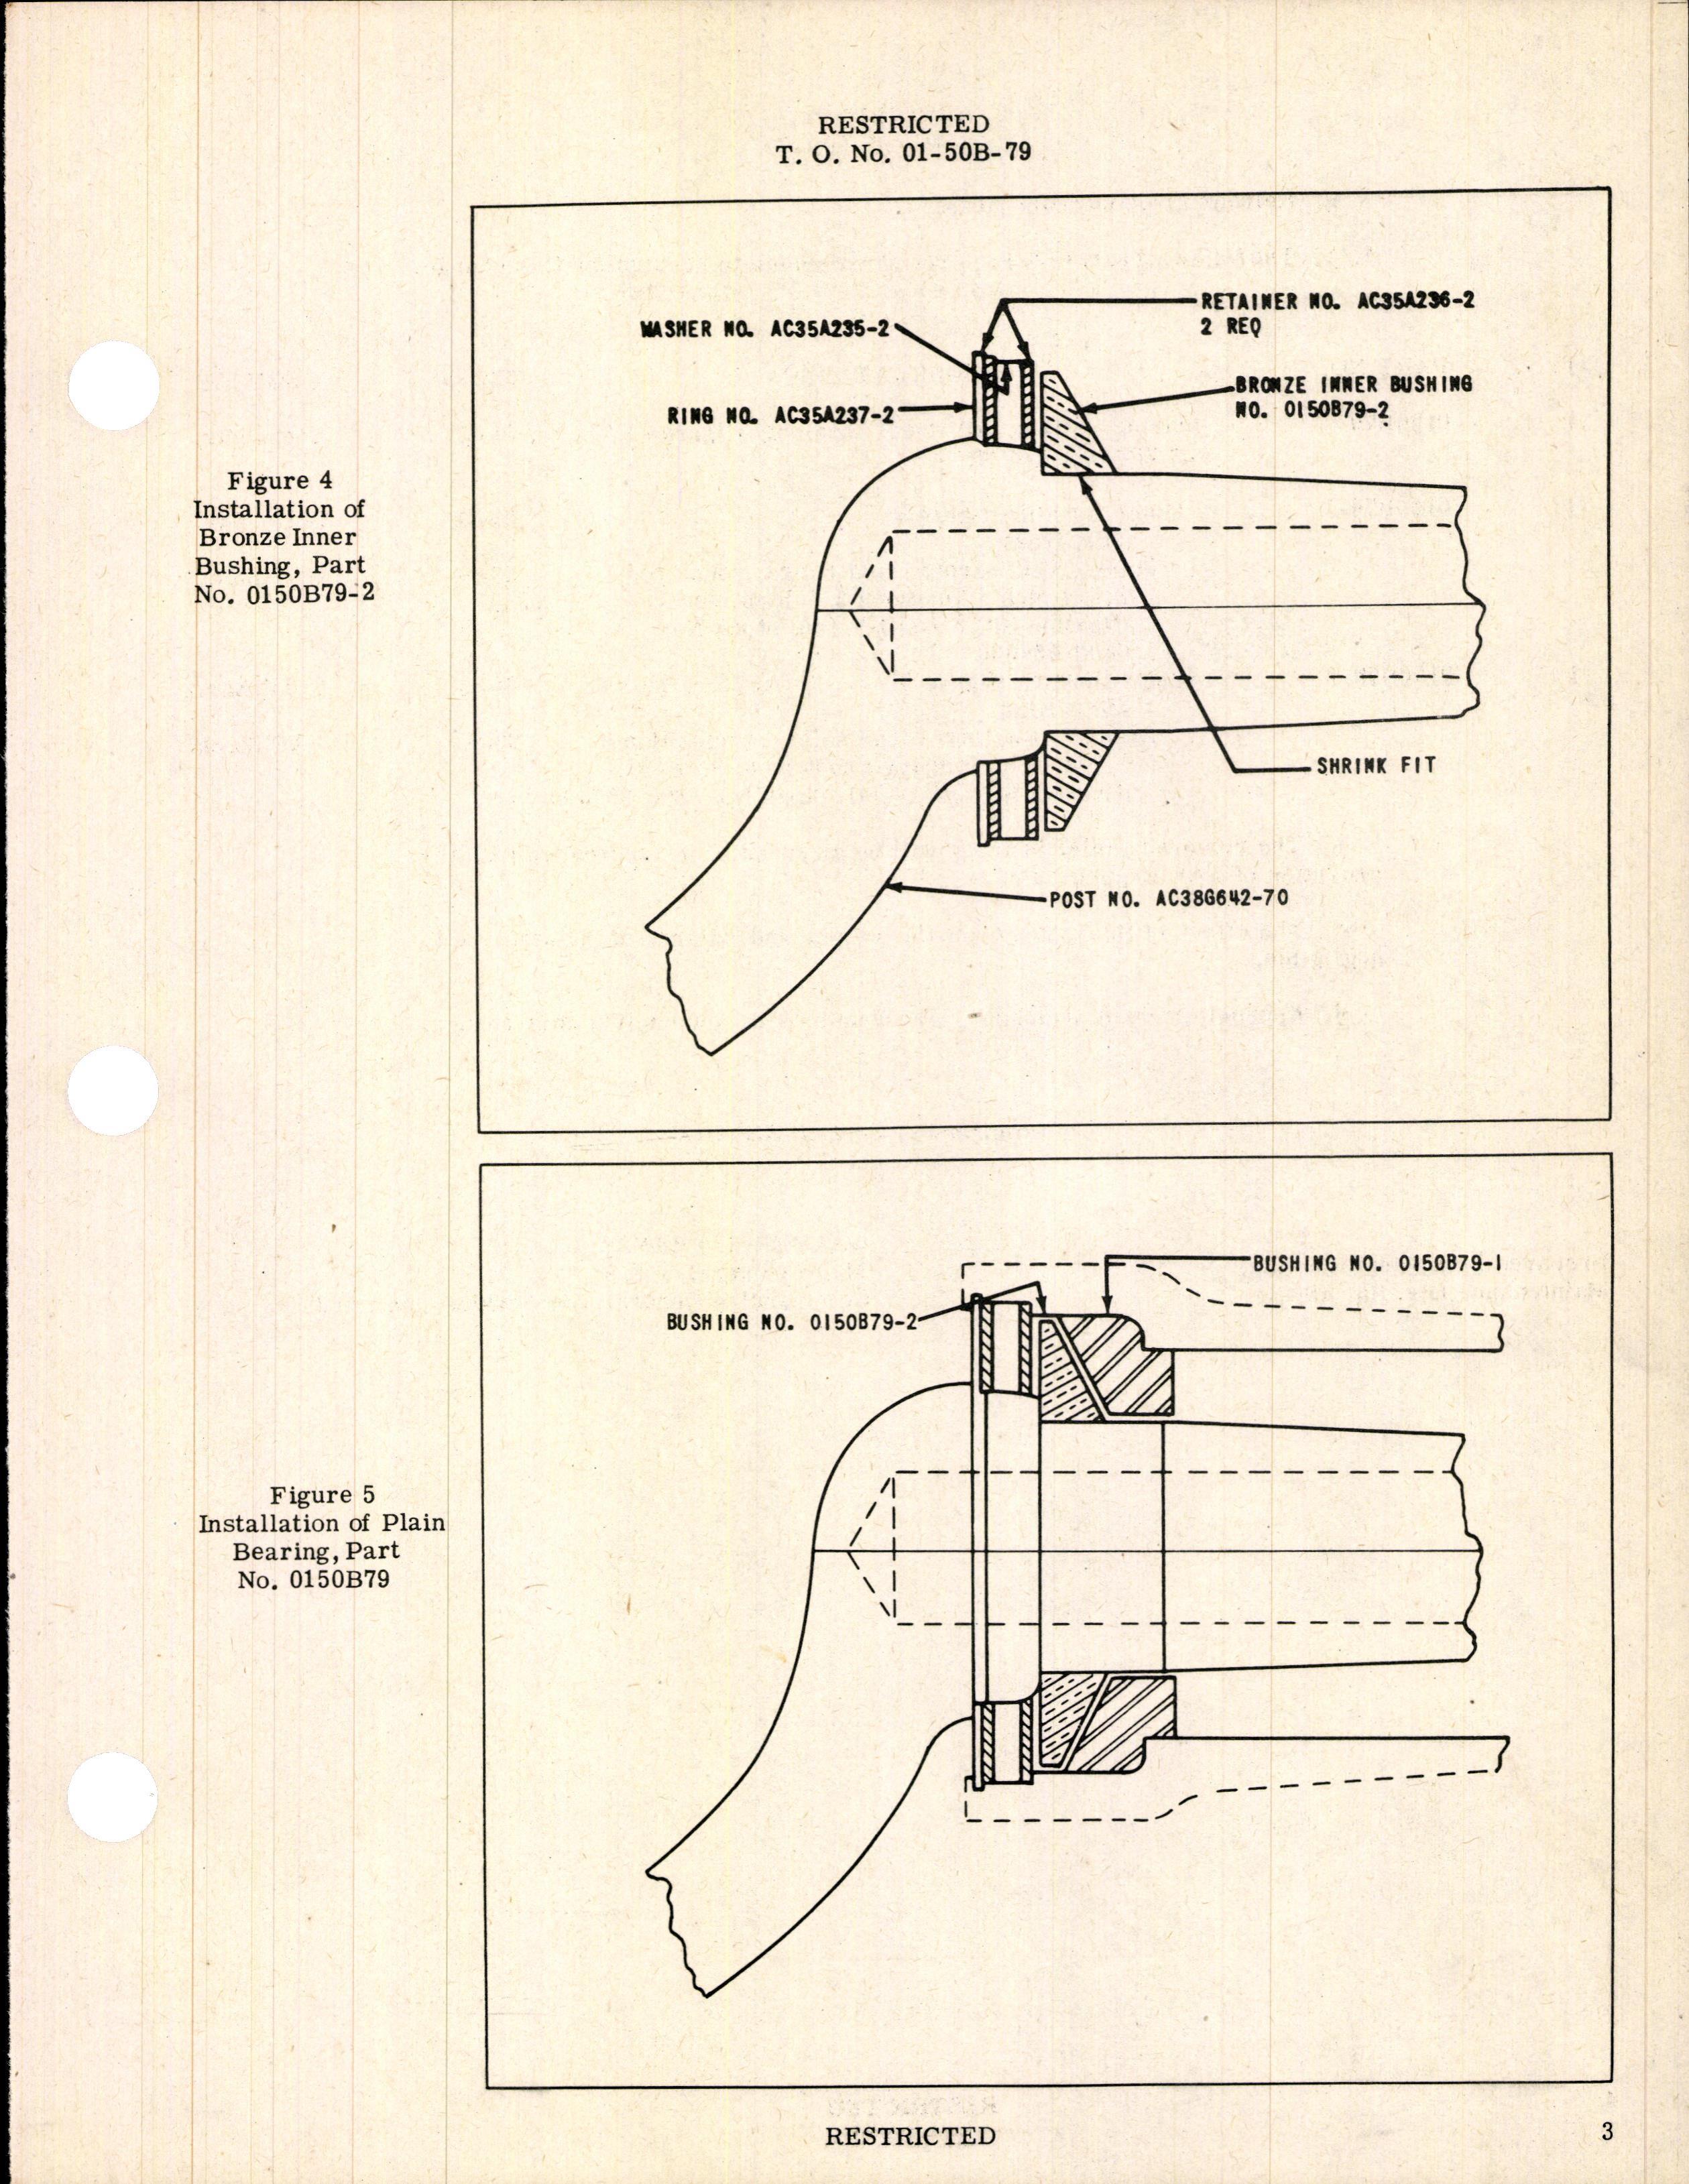 Sample page 3 from AirCorps Library document: Installation of Plain Bearing in Tail Wheel Assembly - BT-13, BT-13A, BT-13B, BT-15, SNV-1, and SNV-2